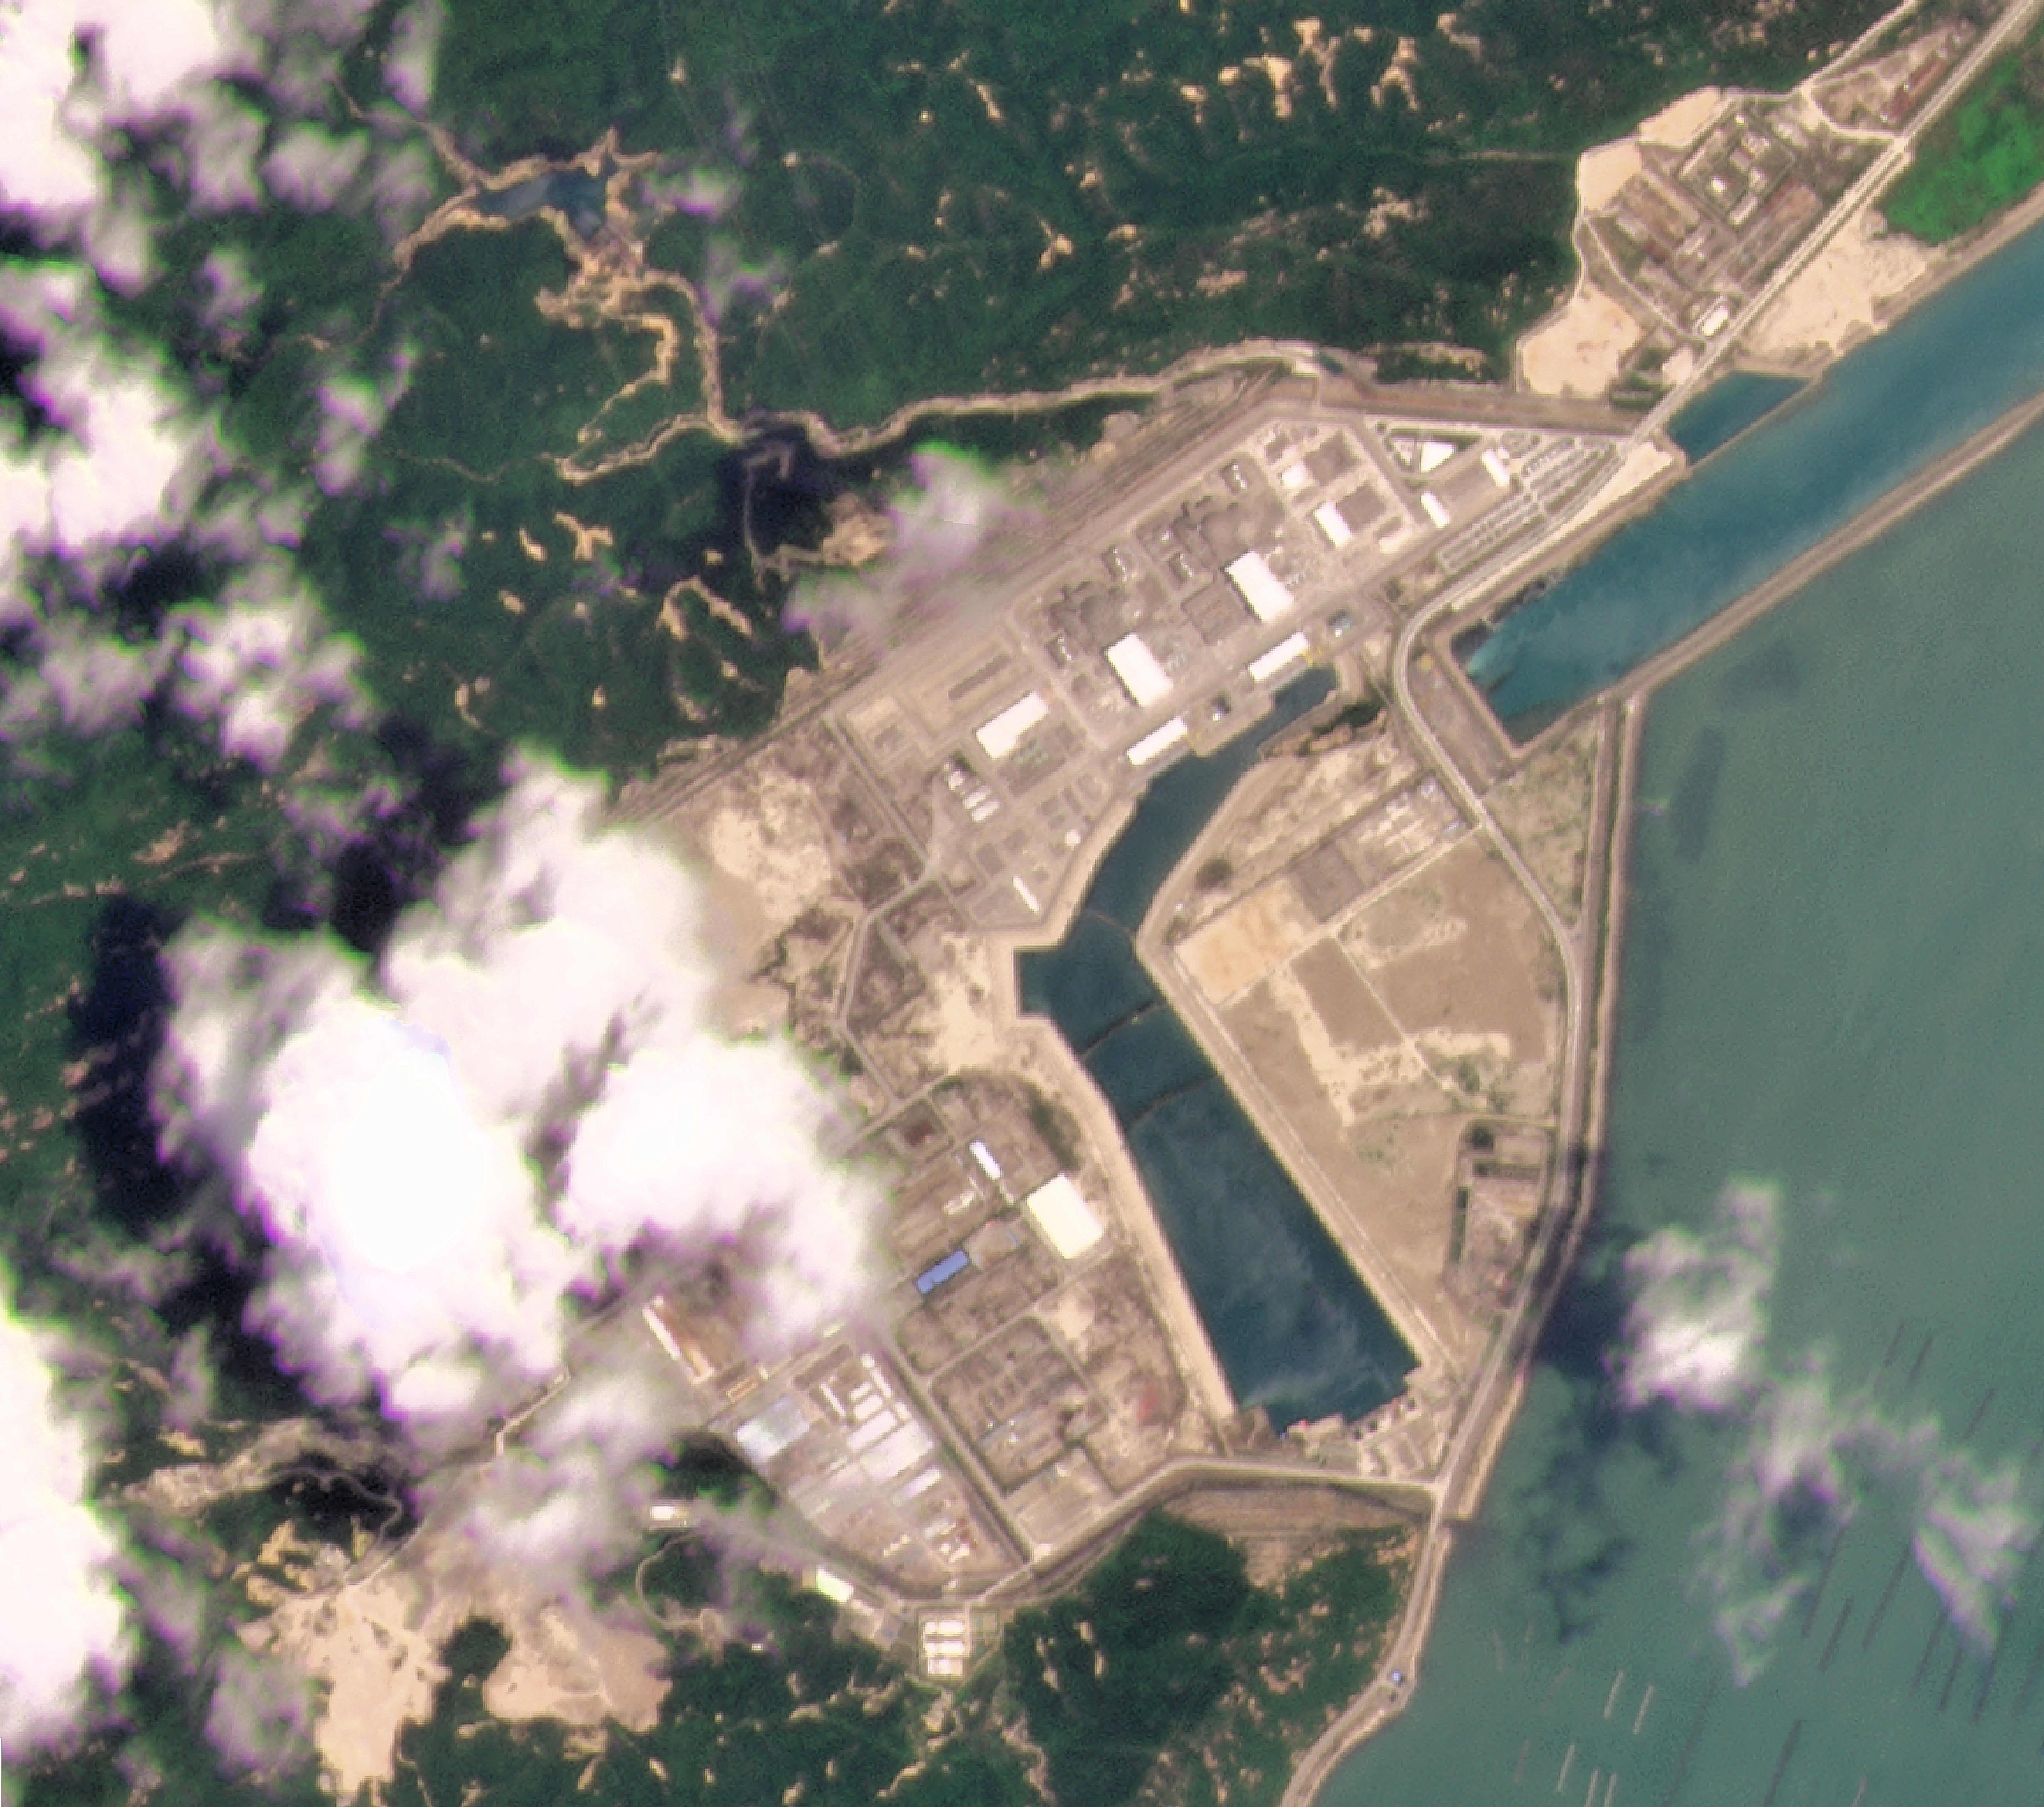 Satellite photo showing the Taishan Nuclear Power Plant in Guangdong province 